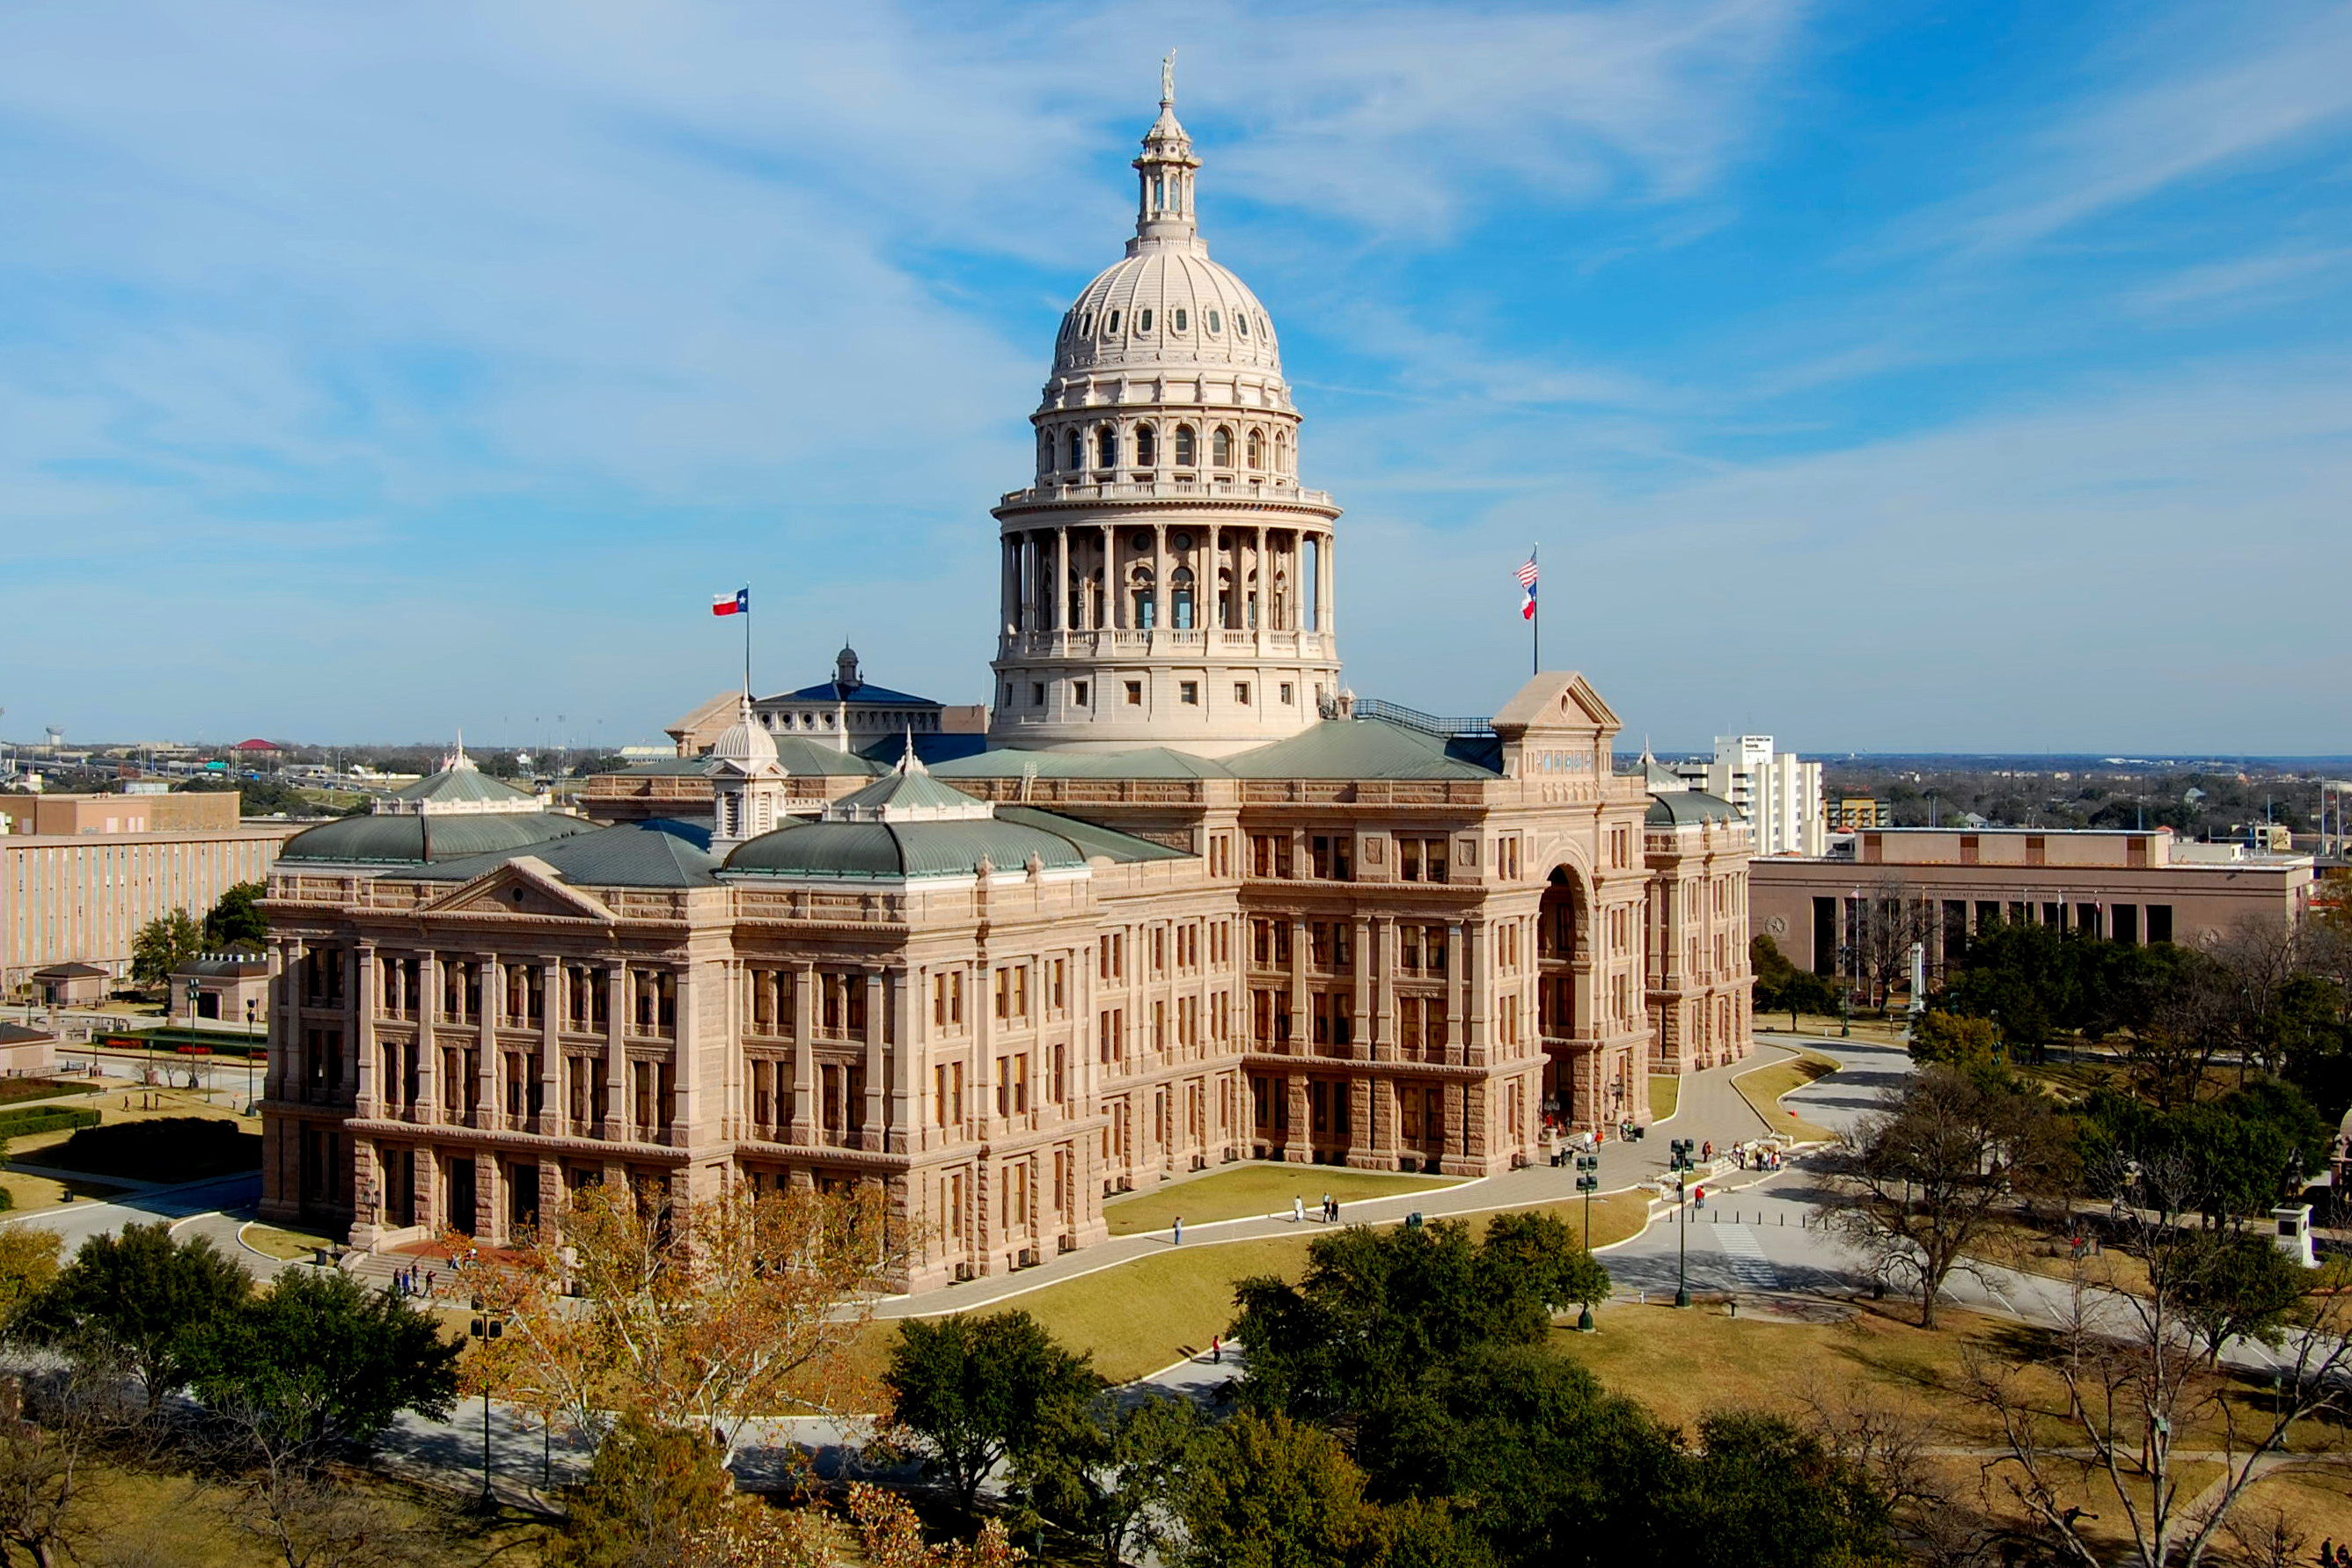 The Texas State Capitol building. Photo courtesy of LoneStarMike, Wikimedia Commons.